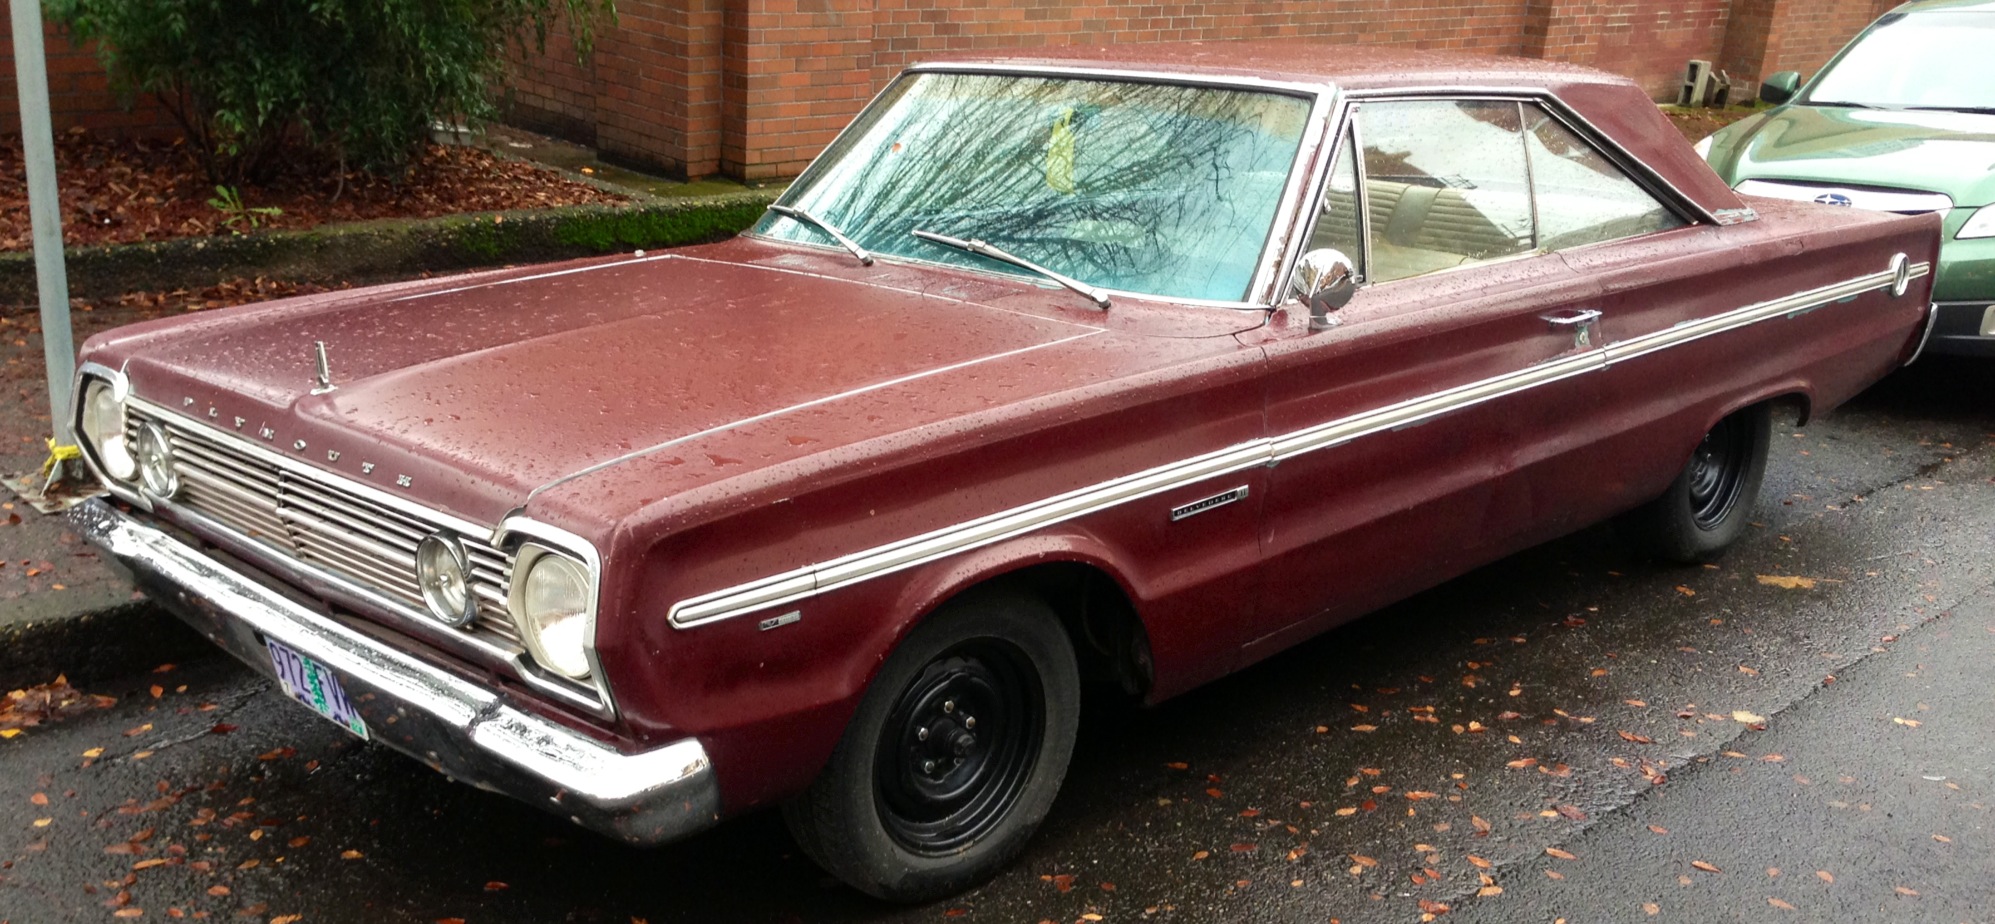 1966 Plymouth Belvedere II.